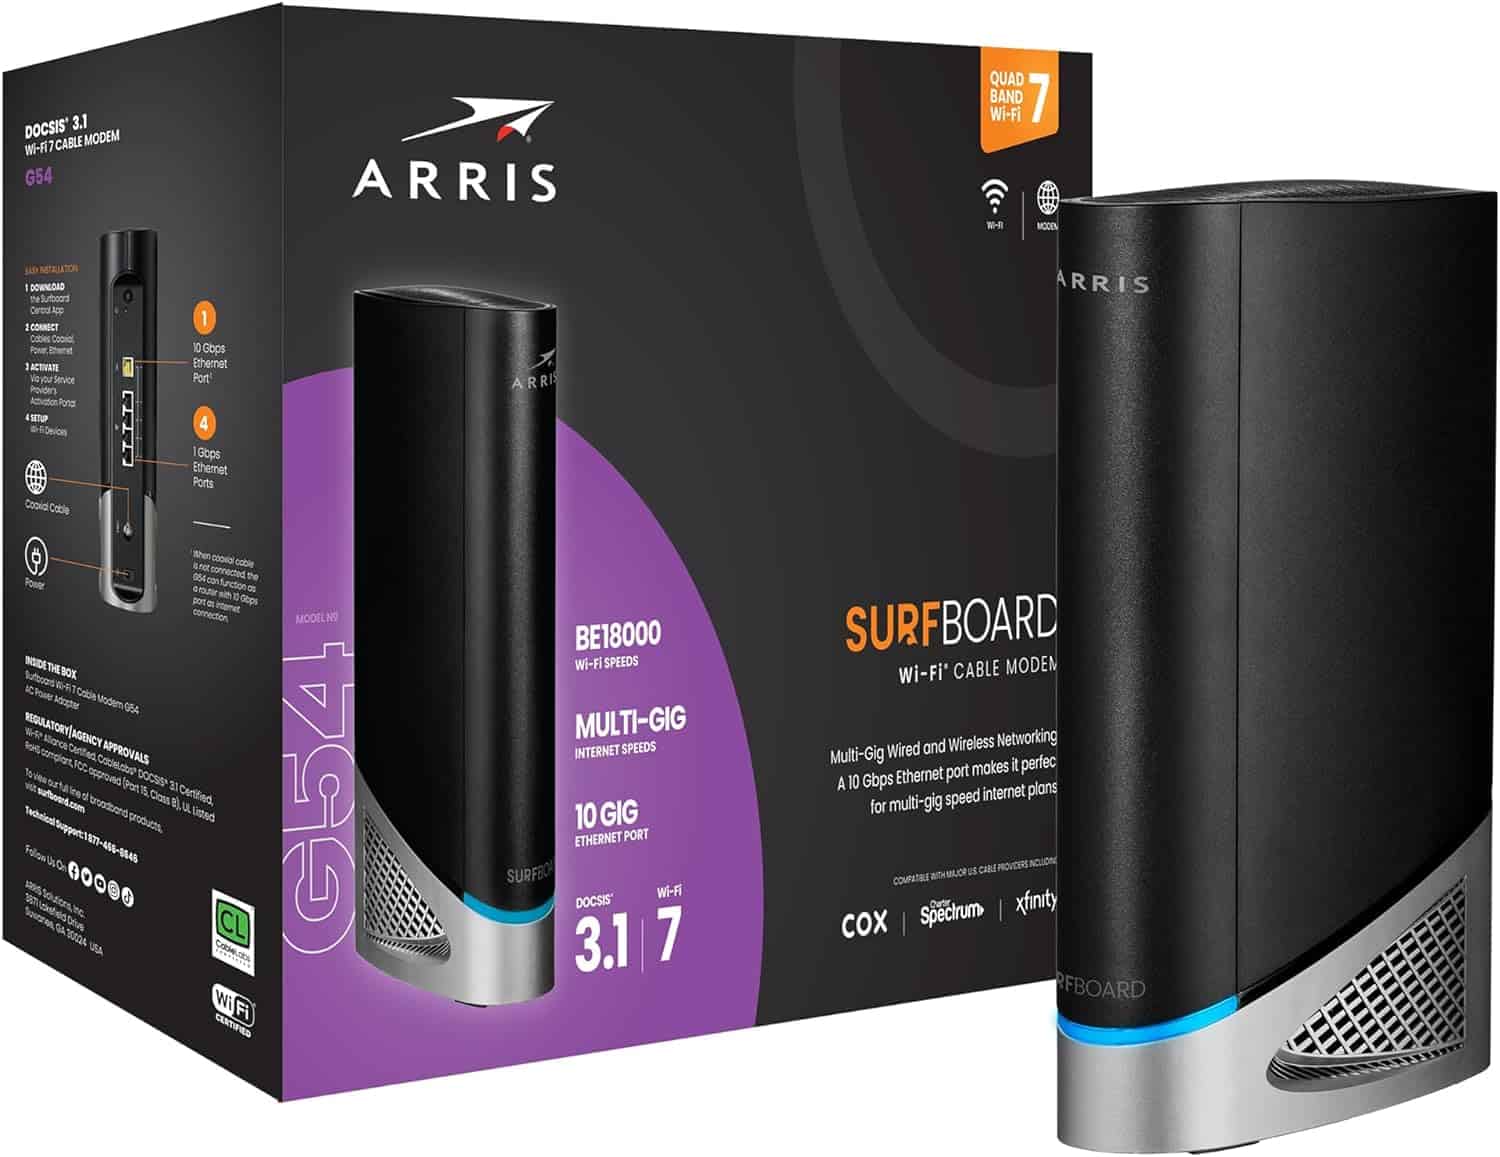 Besy modem router combo - Arris Surfboard G54 multi-gig Wi-Fi router and cable modem with its packaging box showcasing key features and specifications.